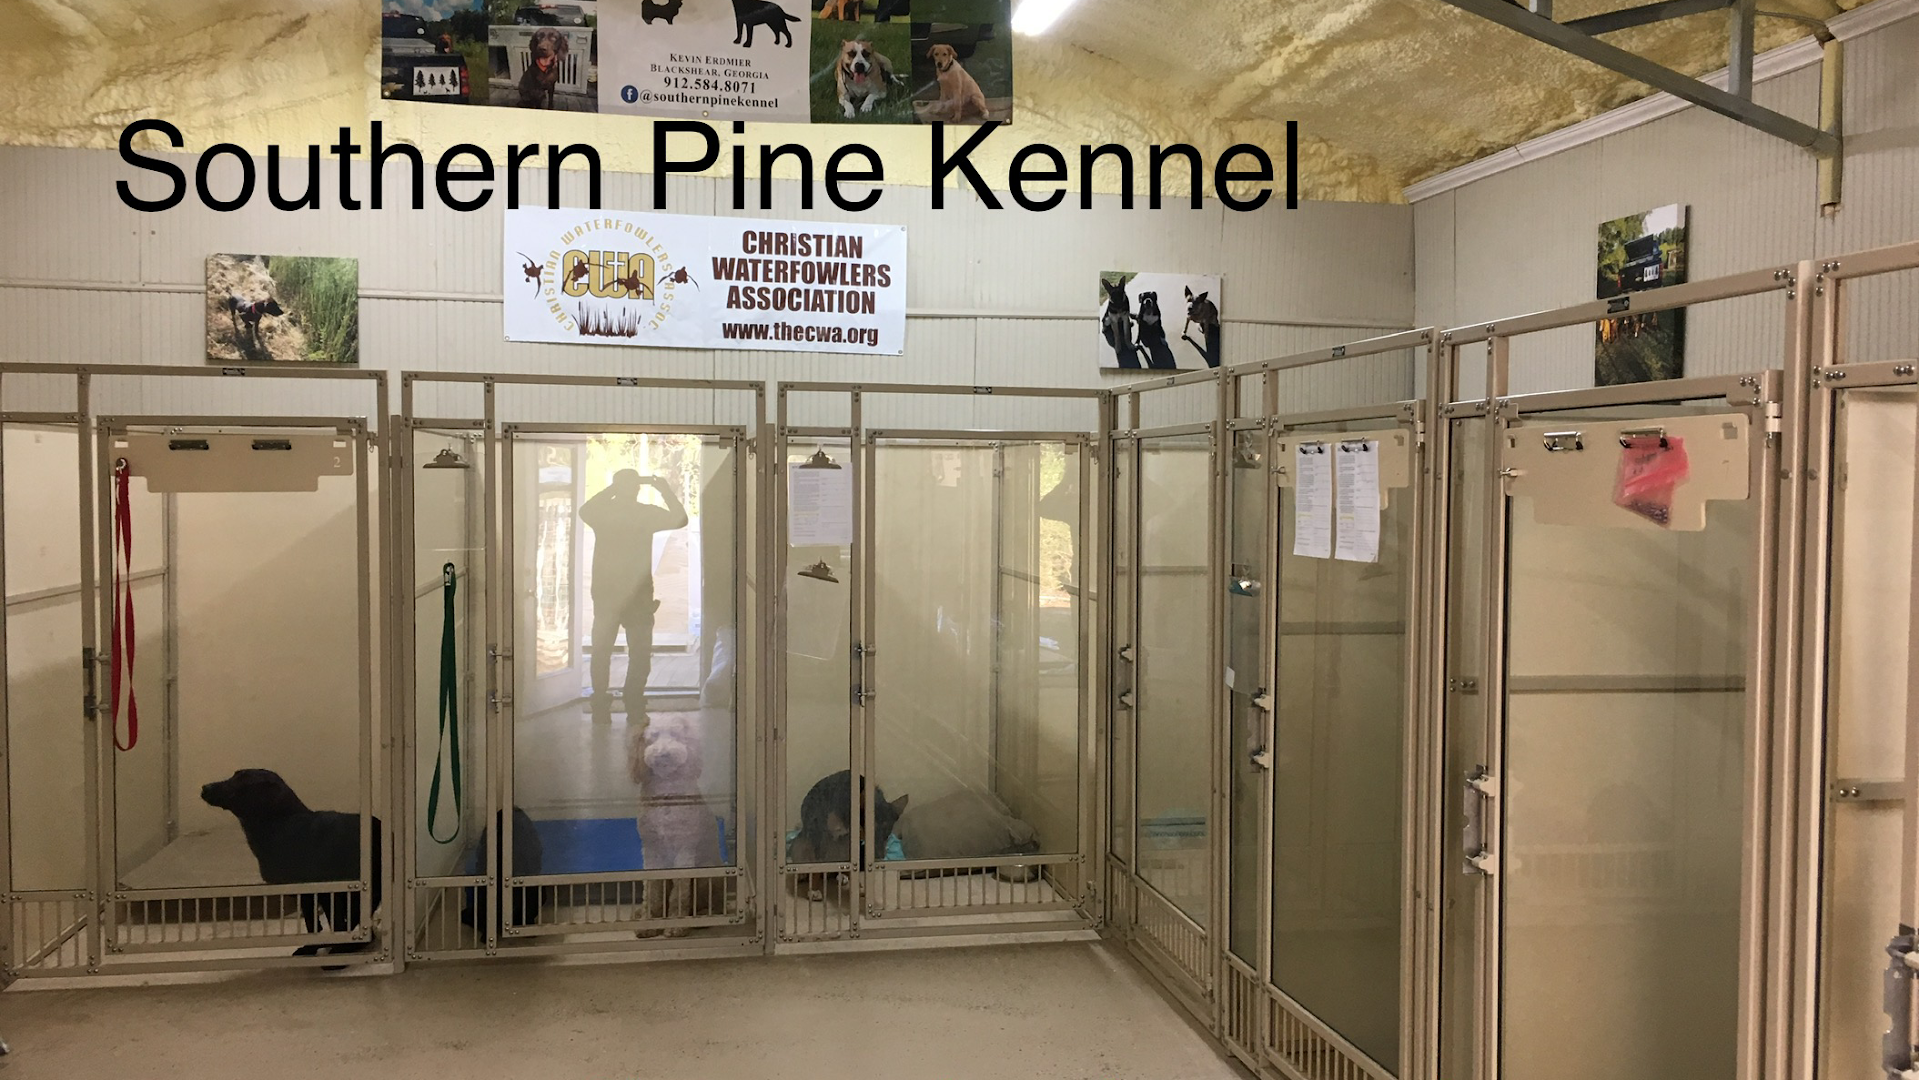 Southern Pine Kennels